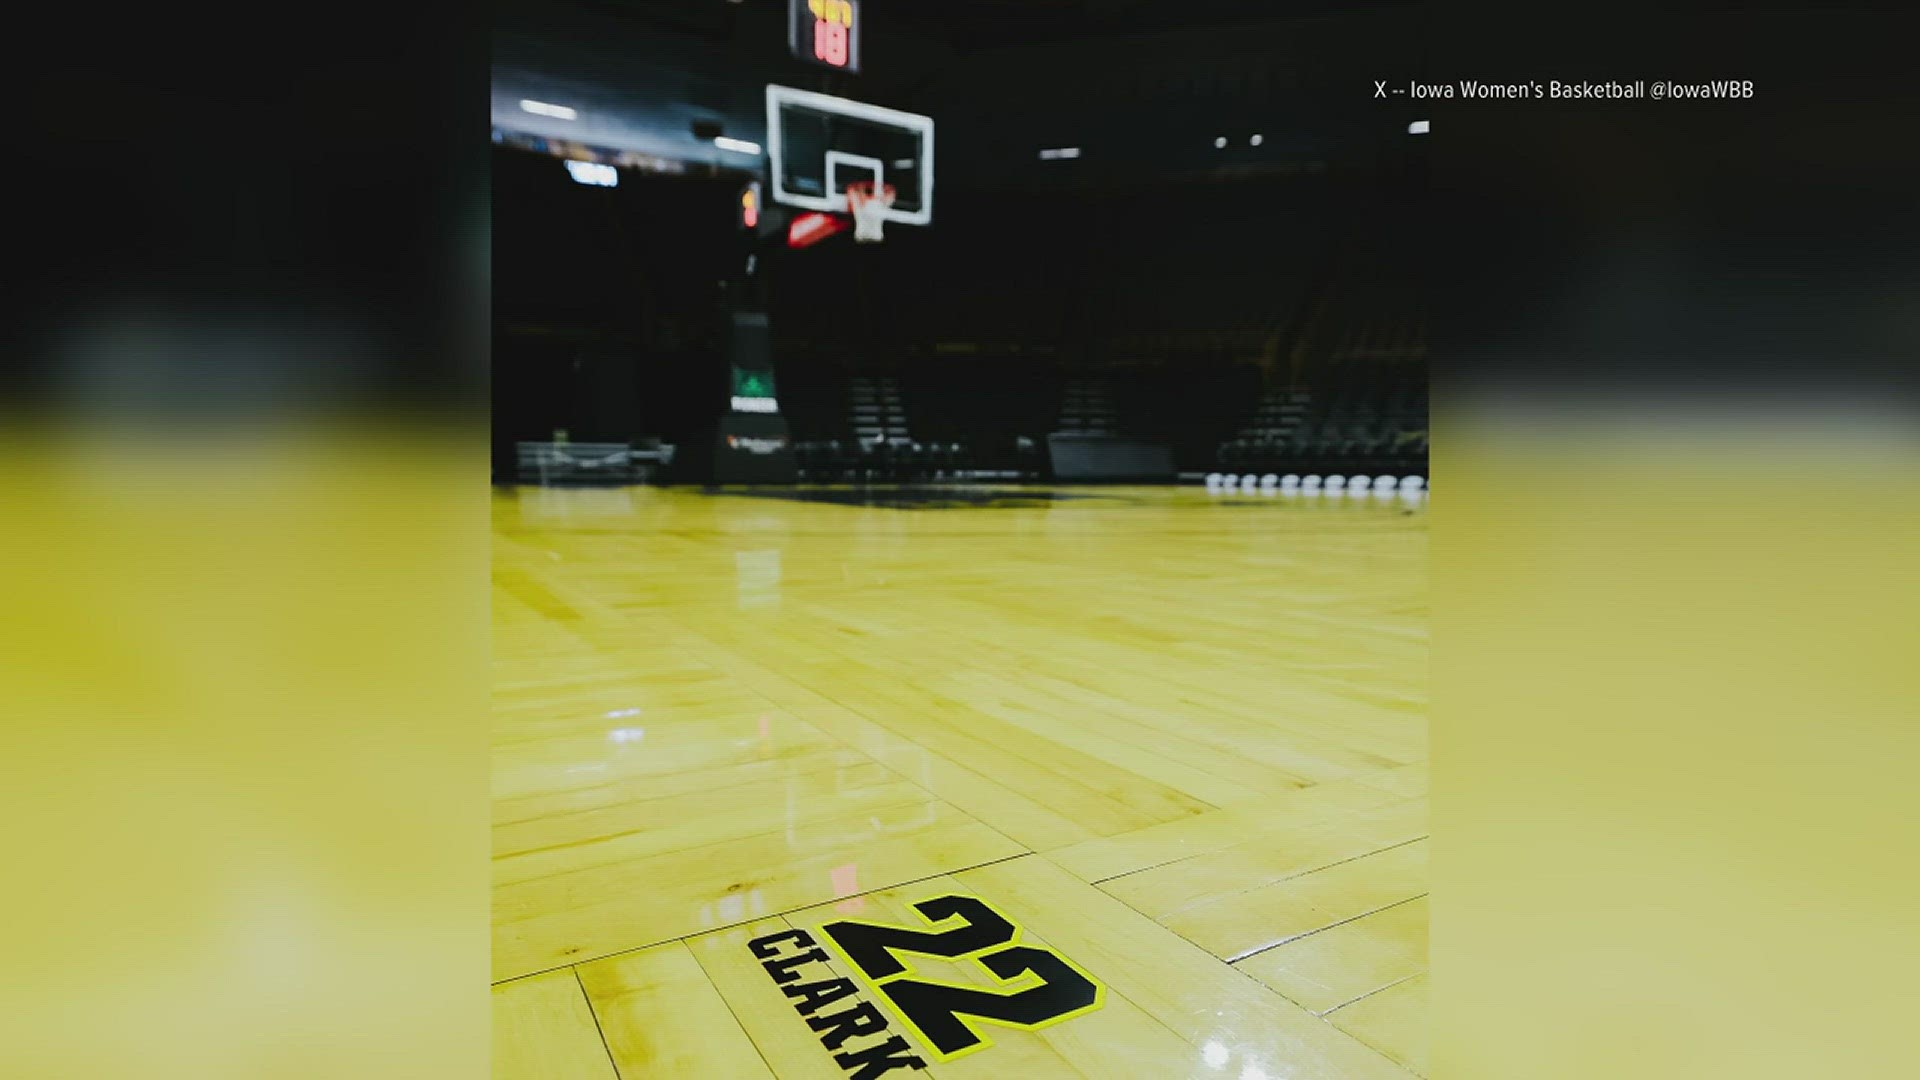 Clark broke the NCAA scoring record on Thursday, Feb. 15. Now, the spot from which she shot her record-breaking three-pointer has a logo bearing her name.